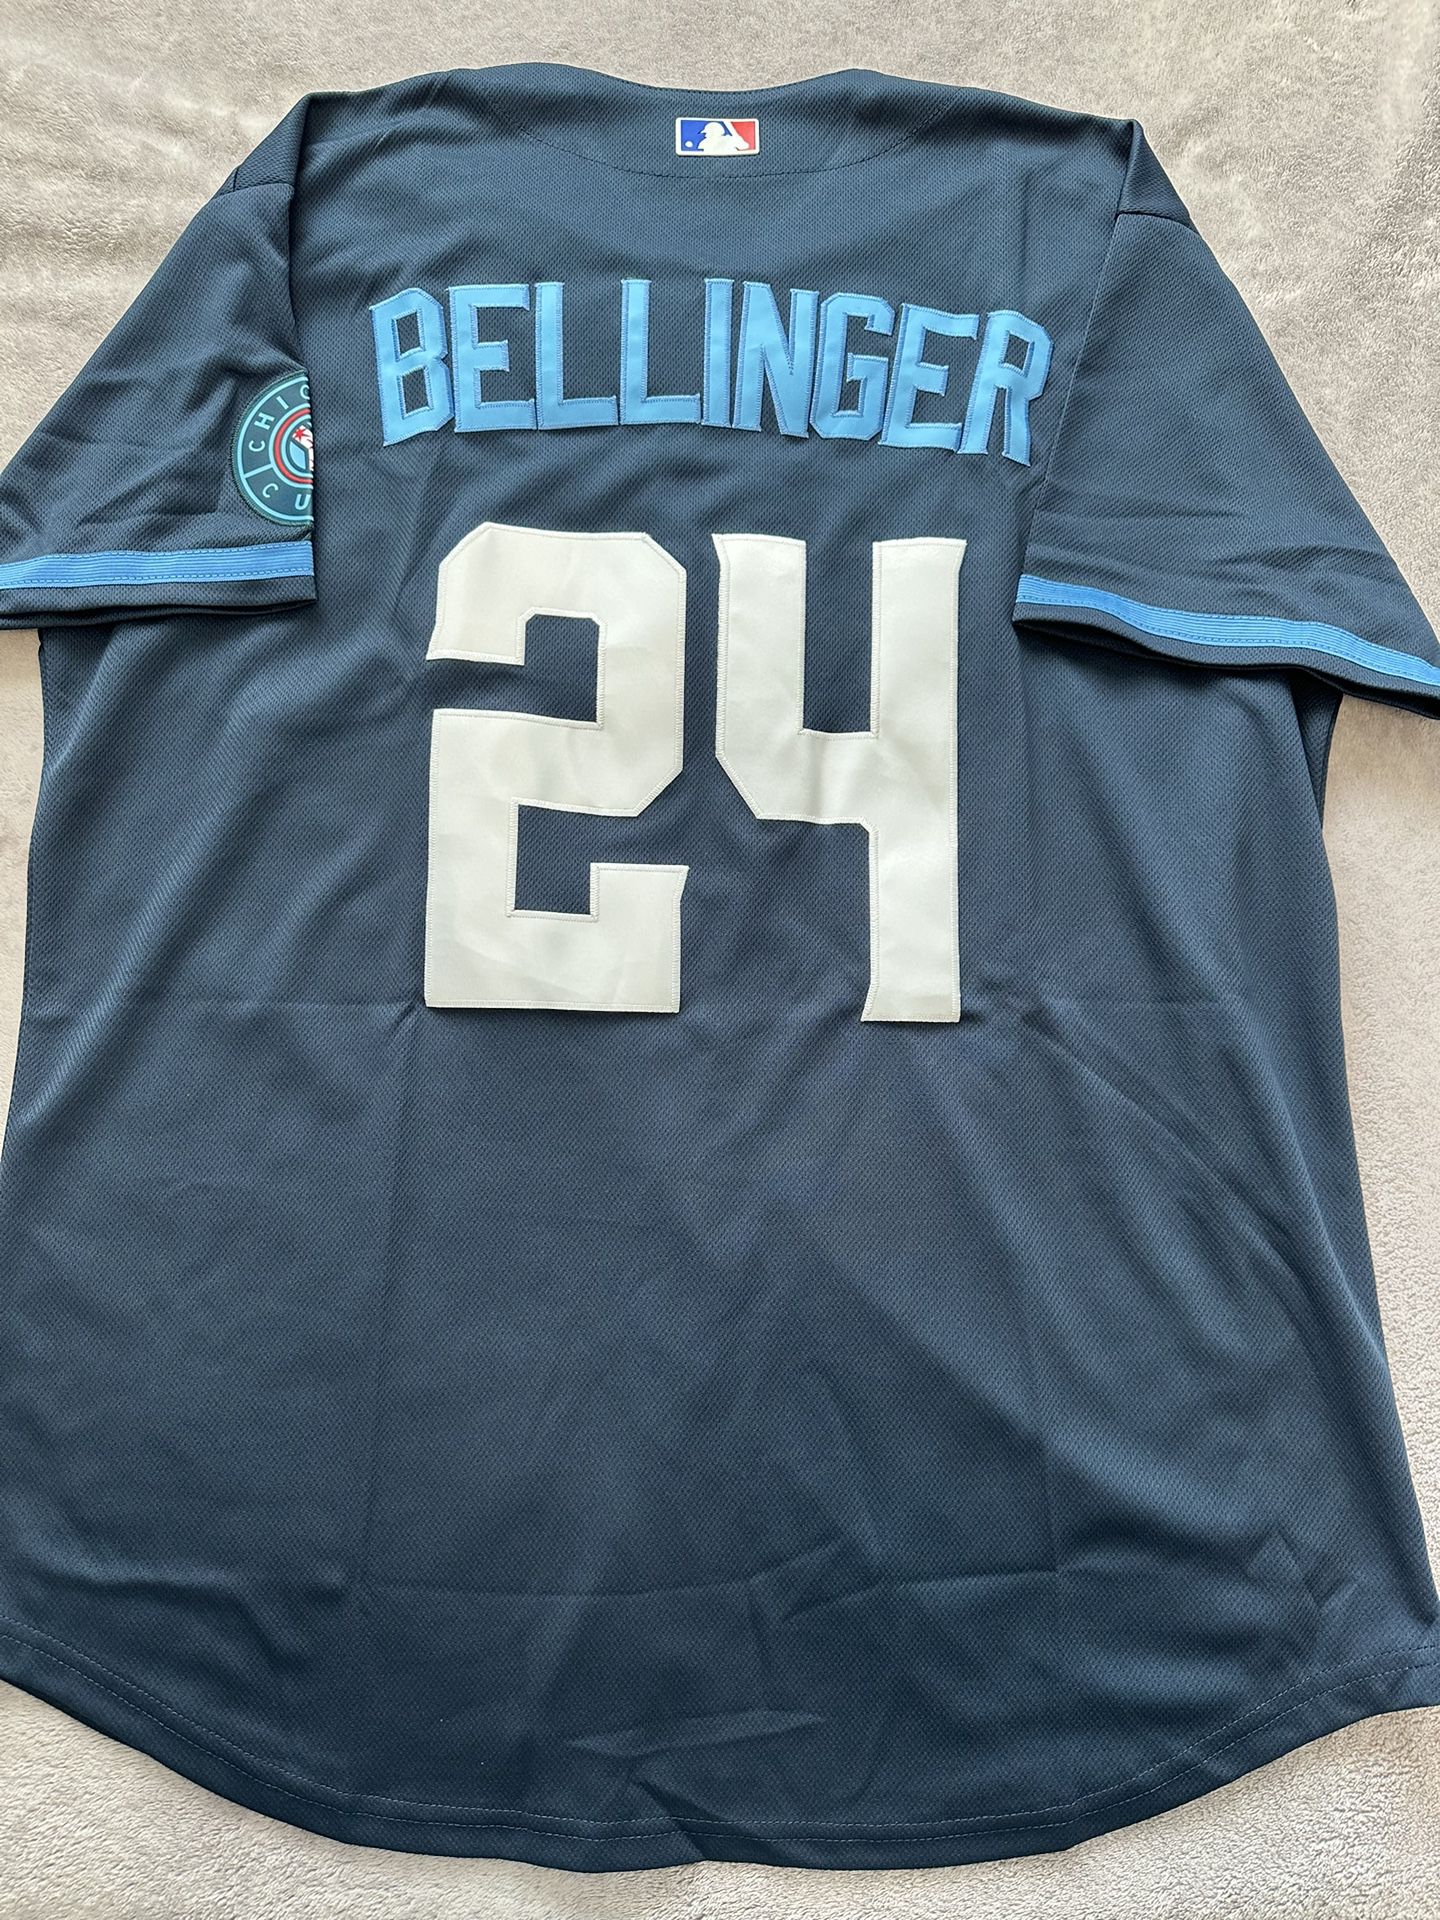 Cody Bellinger Chicago Cubs City Connect Jersey New W/O Tags Size XL